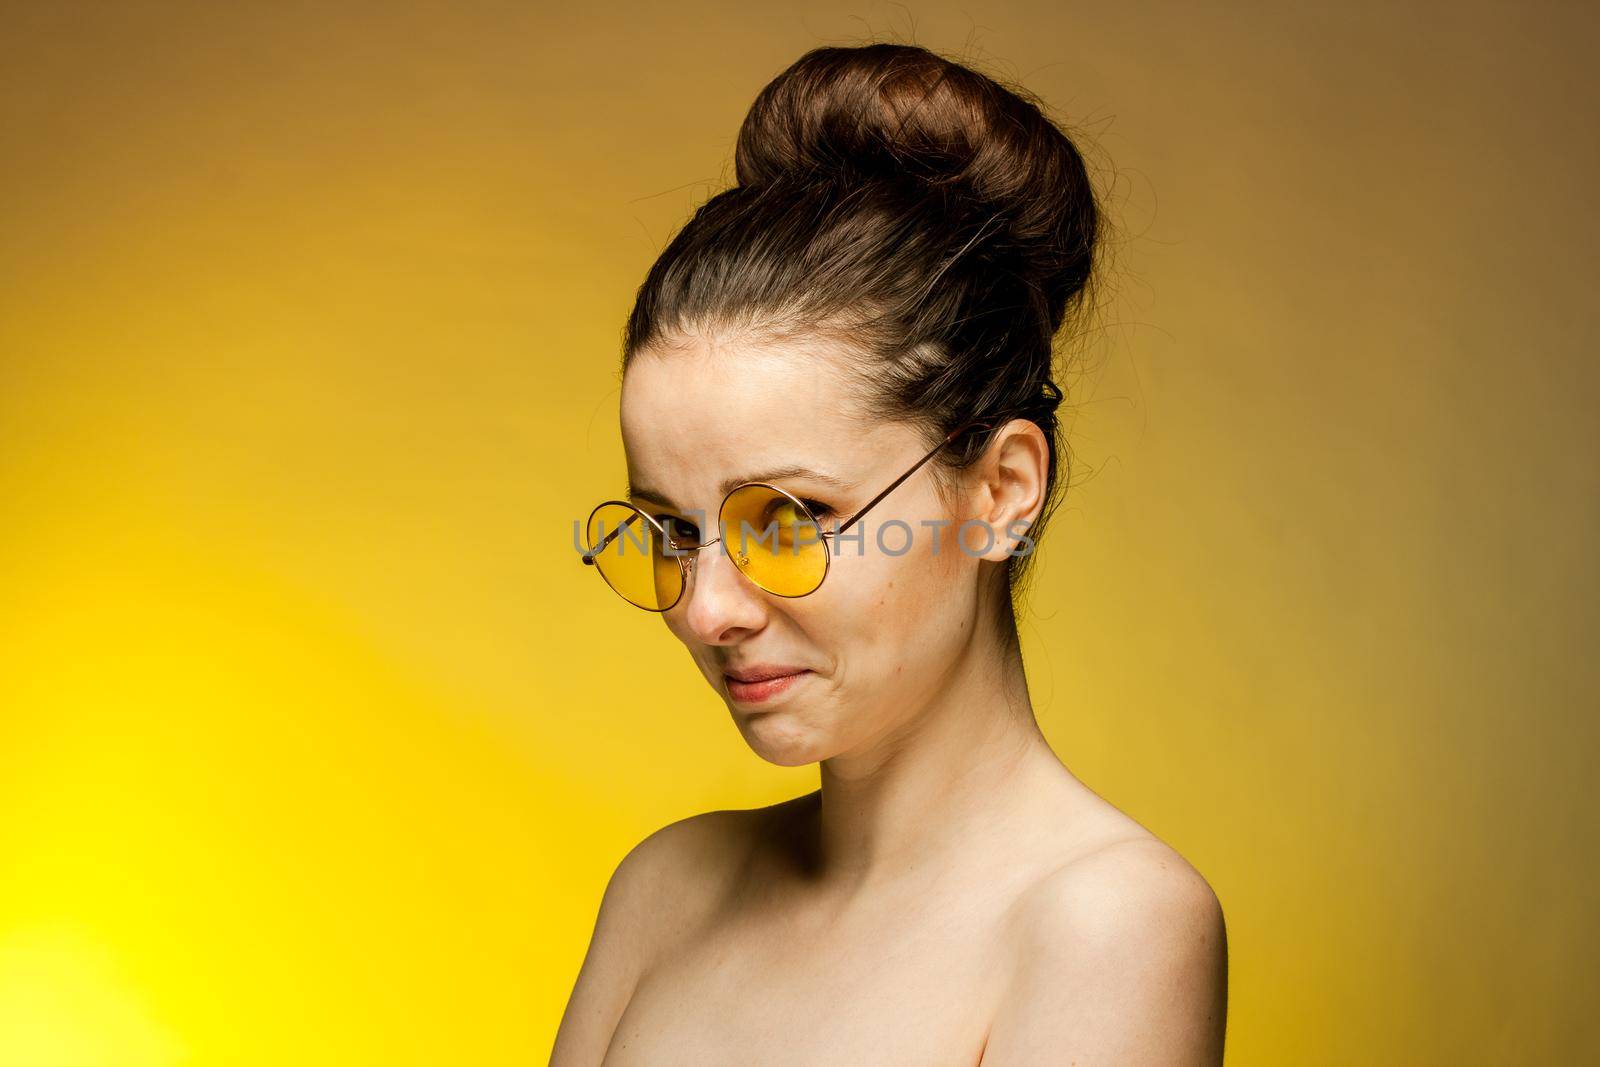 woman in yellow glasses naked shoulders gestures with hands by SHOTPRIME